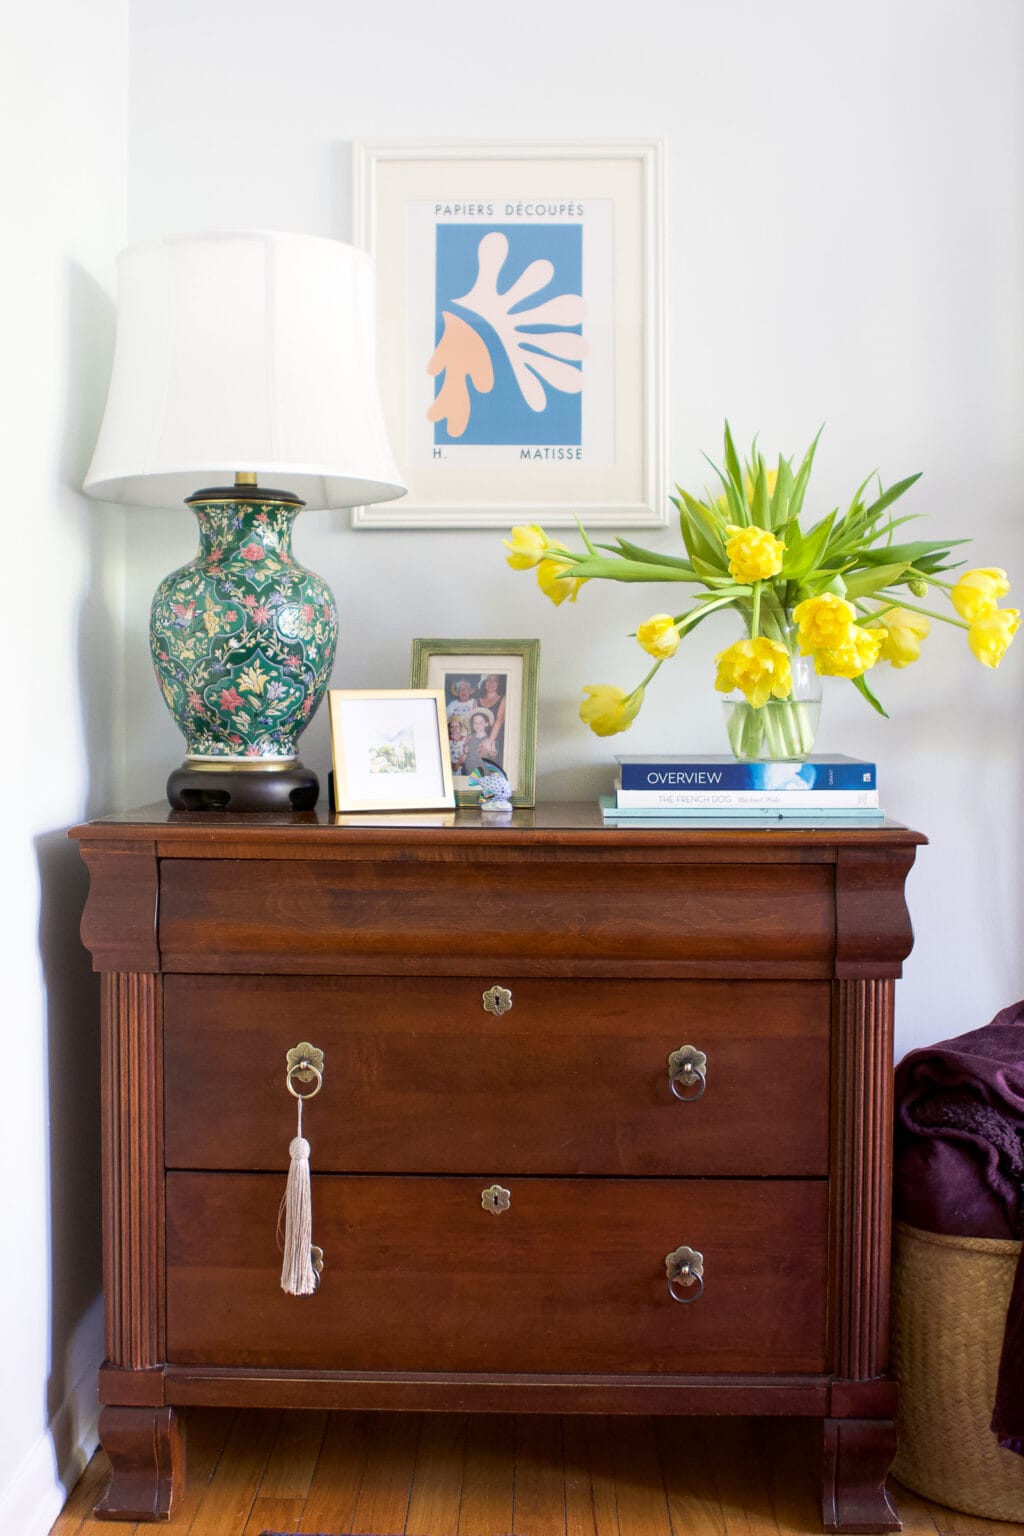 An antique dresser in a colorful living room